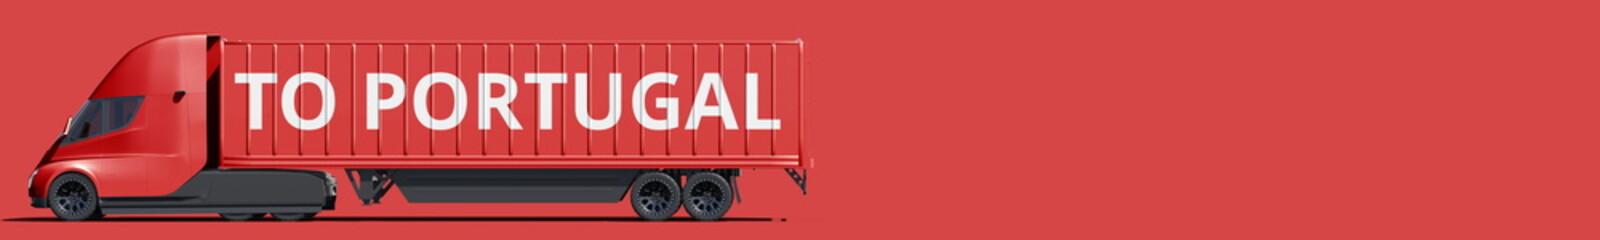 TO PORTUGAL text on the modern electric red trailer truck, 3d rendering